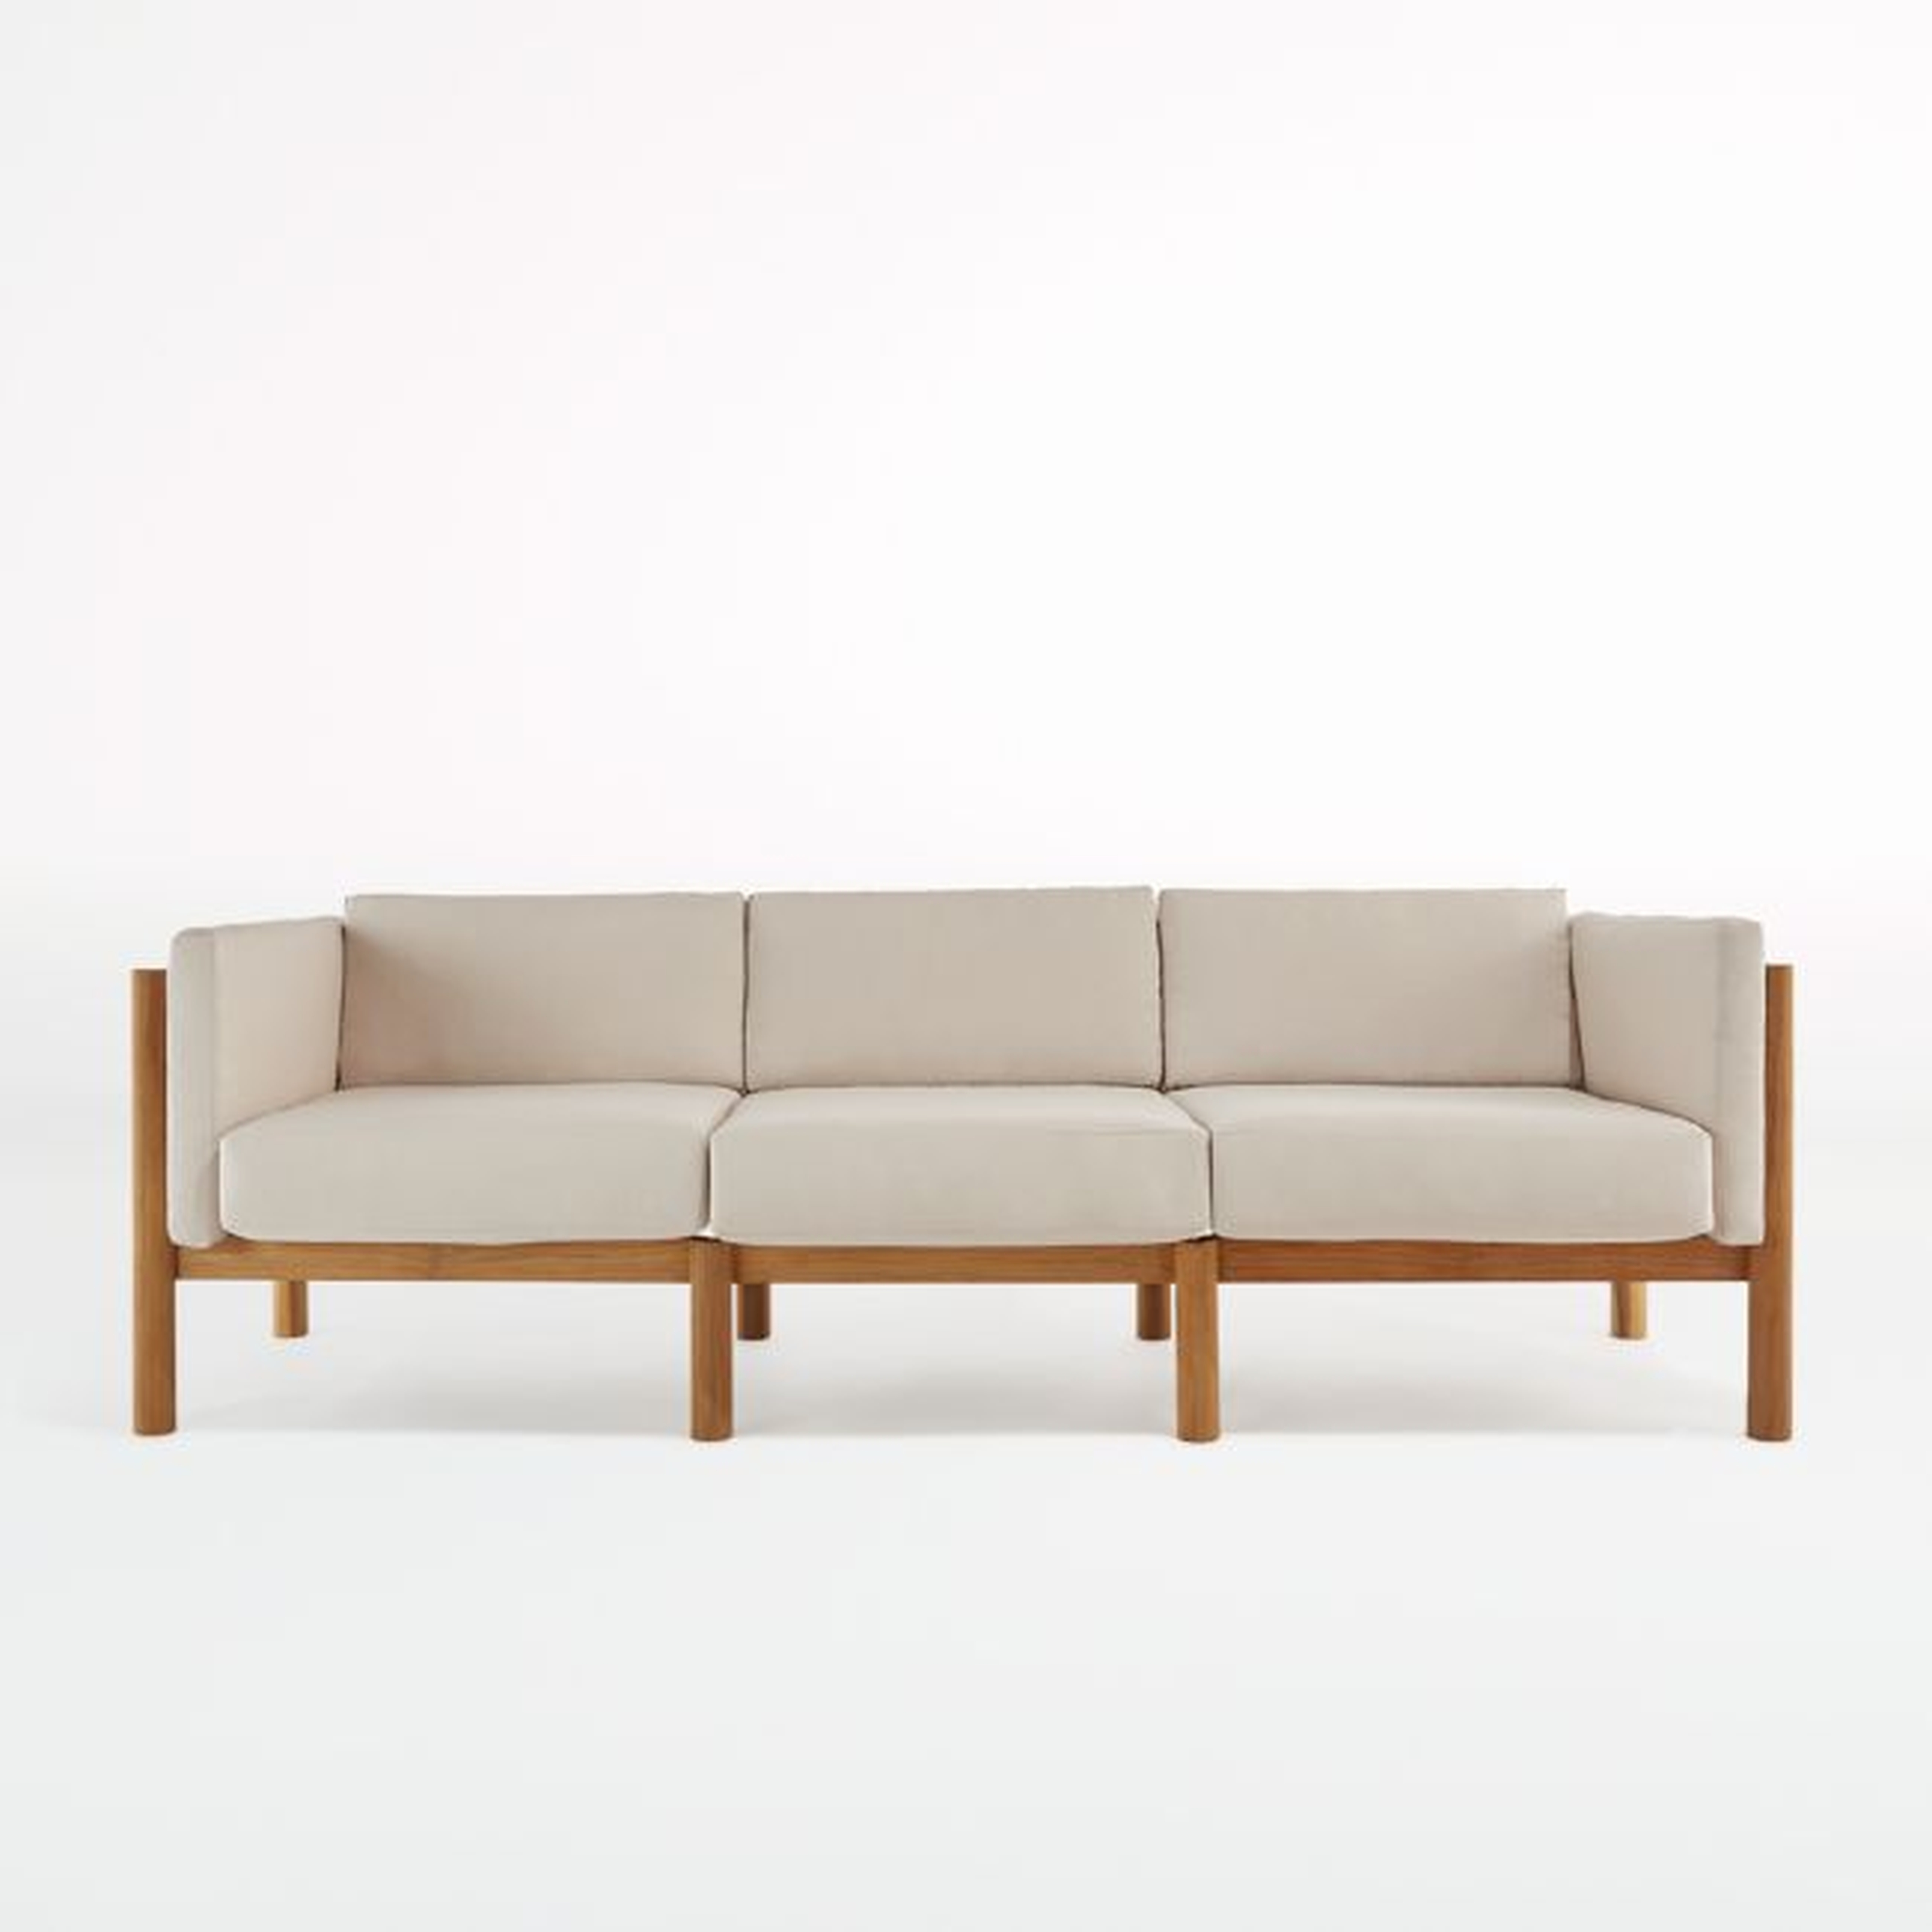 Neighbor ™ Haven 93" Canvas Outdoor Sofa - Crate and Barrel